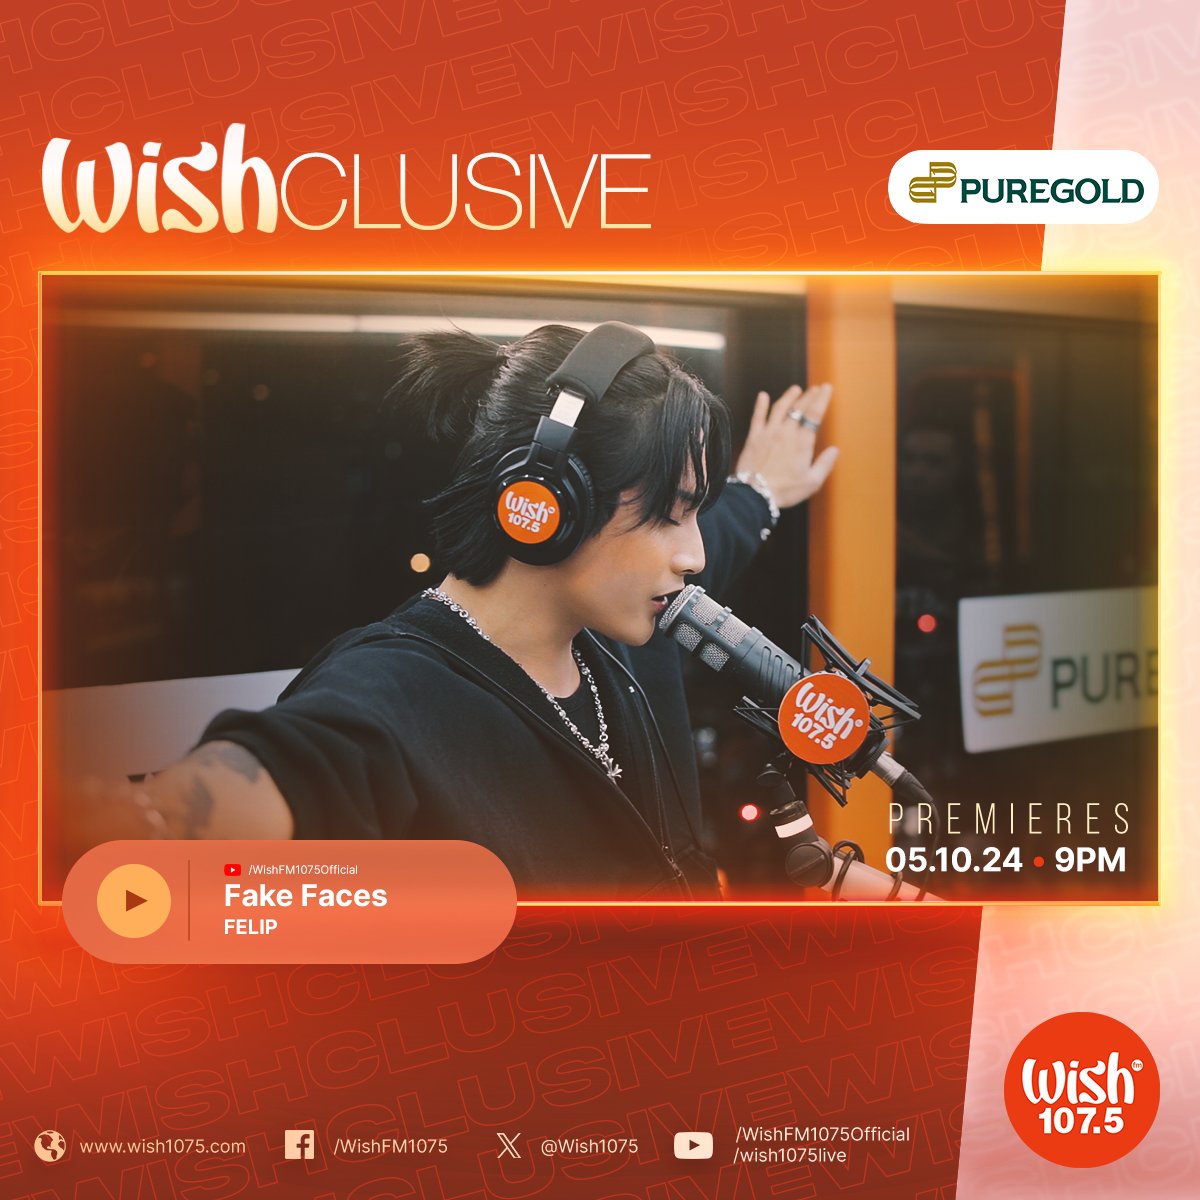 .@felipsuperior is unafraid to uncover his emotions. Watch him perform 'Fake Faces' aboard the Wish Bus! His Wishclusive video drops at 9 on our YouTube channel! This Wishclusive is presented by @Puregold_PH. For more exciting surprises, subscribe at youtube.com/user/PuregoldC…